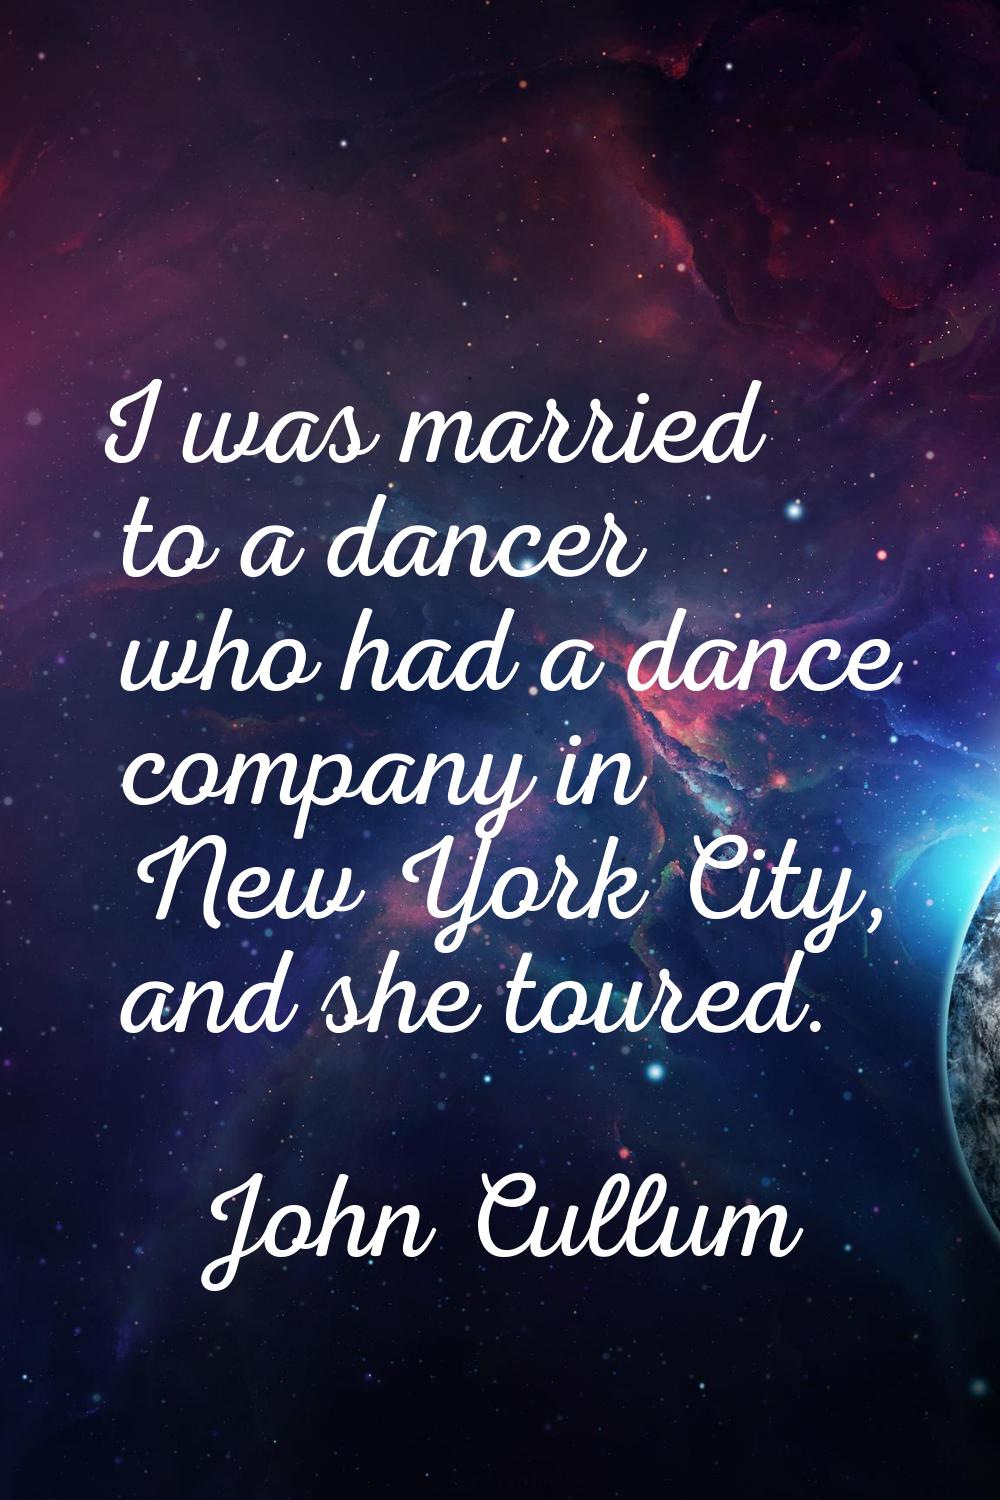 I was married to a dancer who had a dance company in New York City, and she toured.